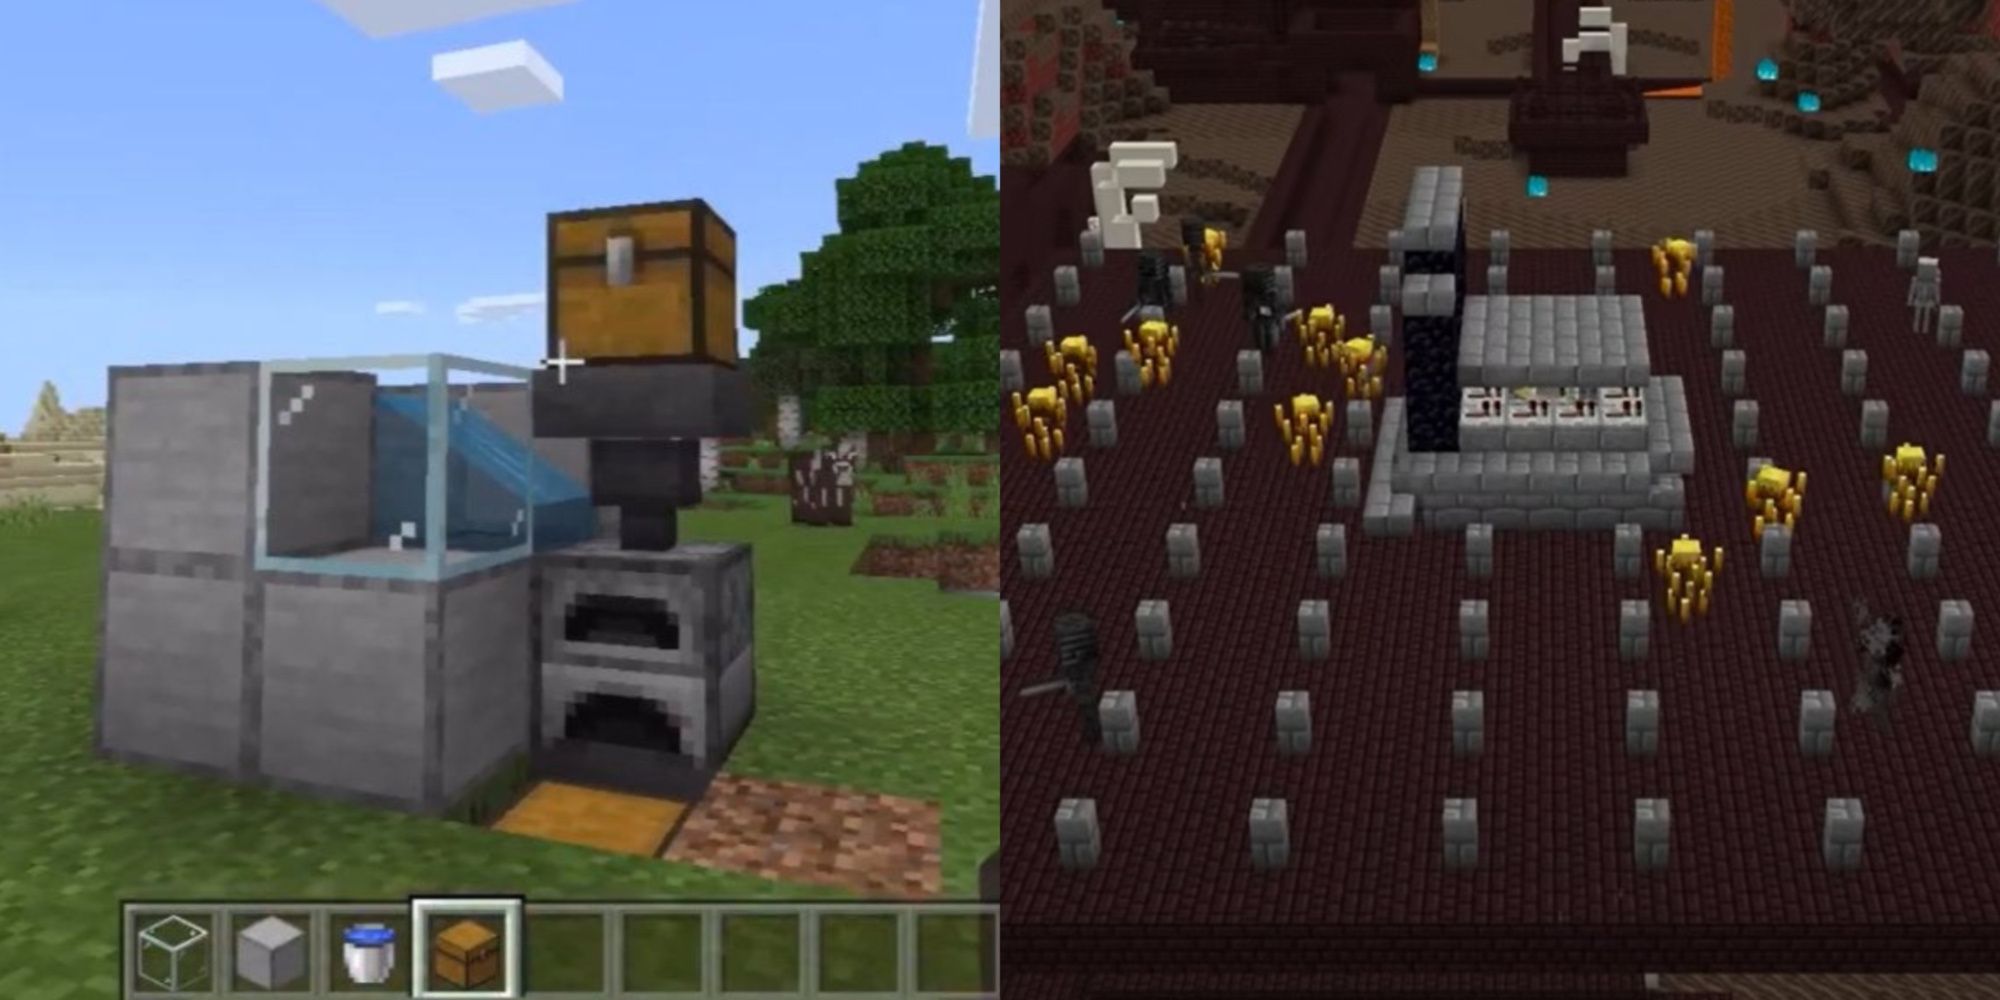 Two screenshots showing buildings in Minecraft.